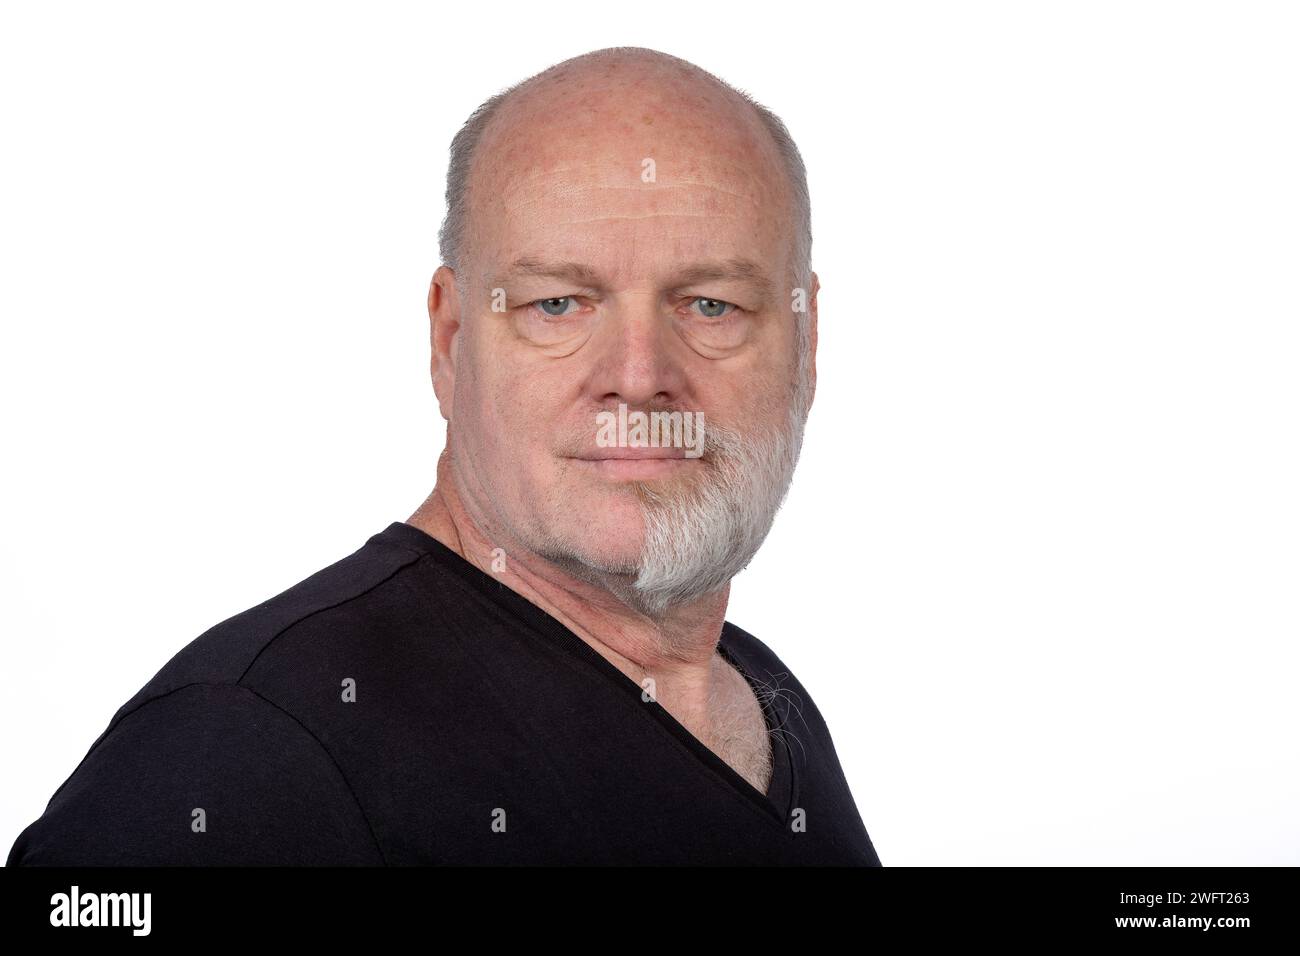 Focused Middle-Aged Man with Half Shaved Beard in Stylish Black T-Shirt - Confident Portrait on White Background Stock Photo